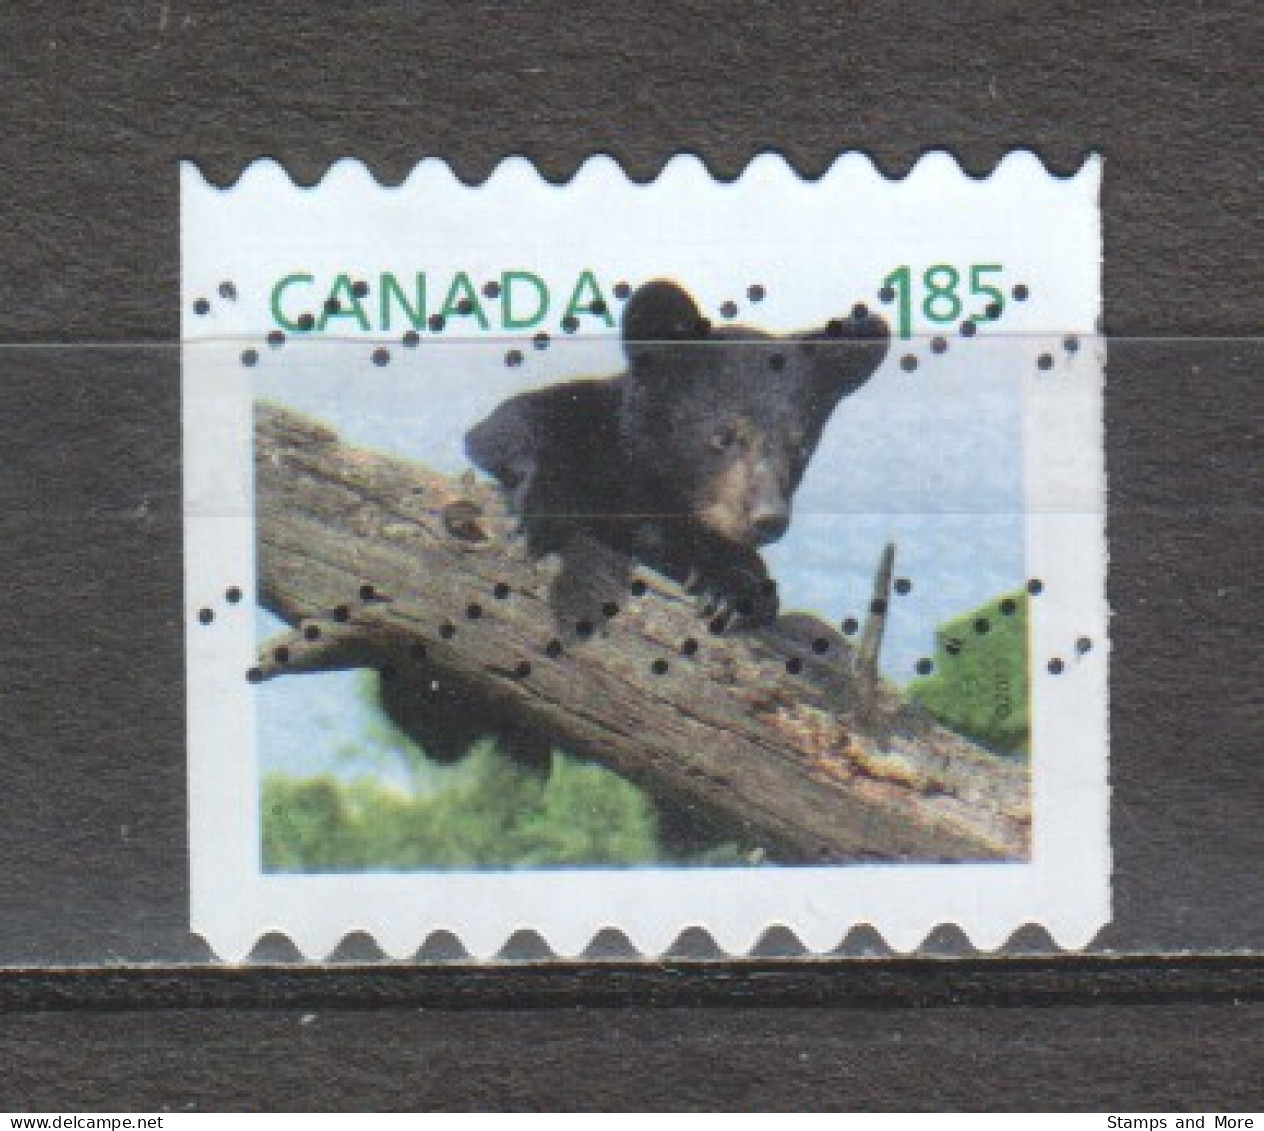 Canada 2013 Mi 2930 Canceled (1) - Used Stamps